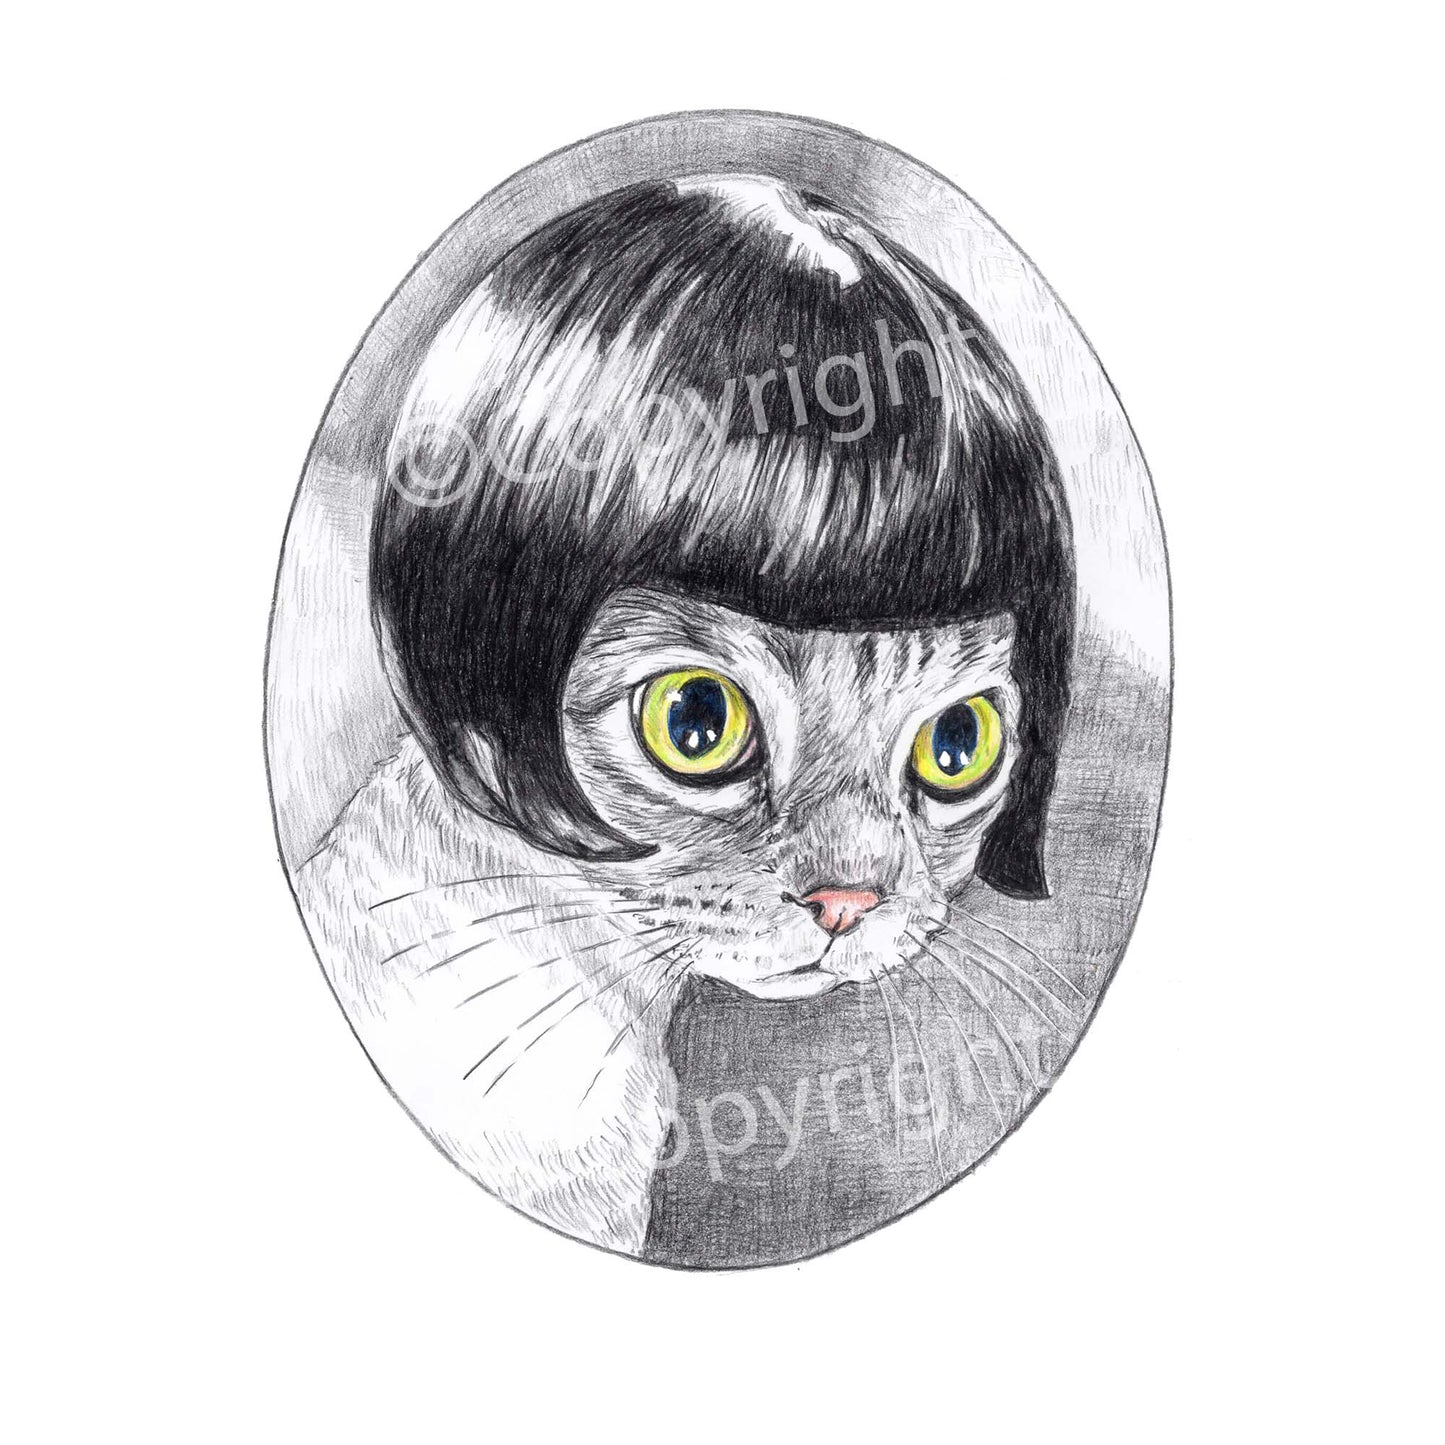 Black and white crayon drawing of a Siamese cat styled like a silent movie star. Art by Deidre Wicks